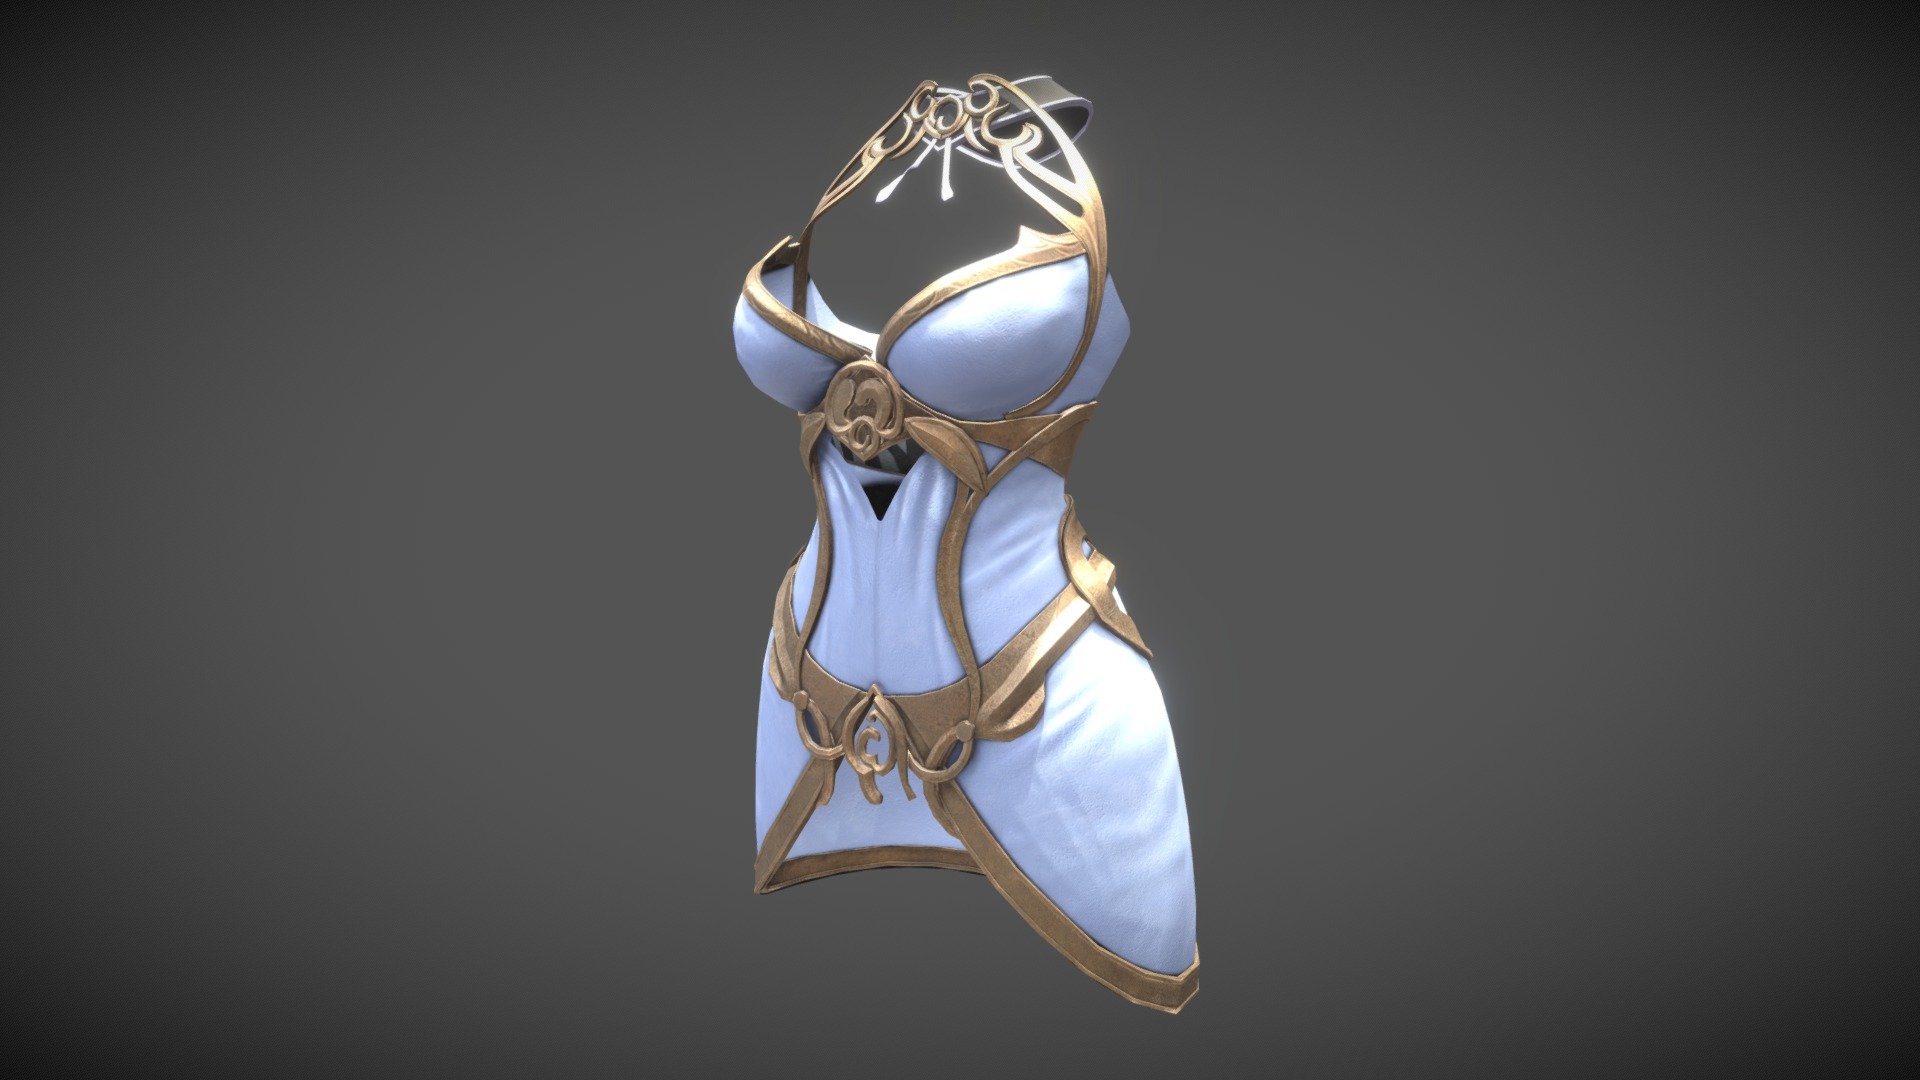 Hi this is Breast Armor Female body fantasy game asset lowpoly 
Clean topology and UV for standard
This file include 
 PBR textures




4K Textures Maps ( tiff 16 bits ) Inclues :

. Albedo ( basecolor )

. Normal 

. Roughness

. Metalness

. Height




OBJ ( Mesh Only )

This file is  for game and film
If you need anything just message me, don;t hesitate

Thank you so much ! - Breast Armor Female body fantasy - 3D model by nongnong96 3d model